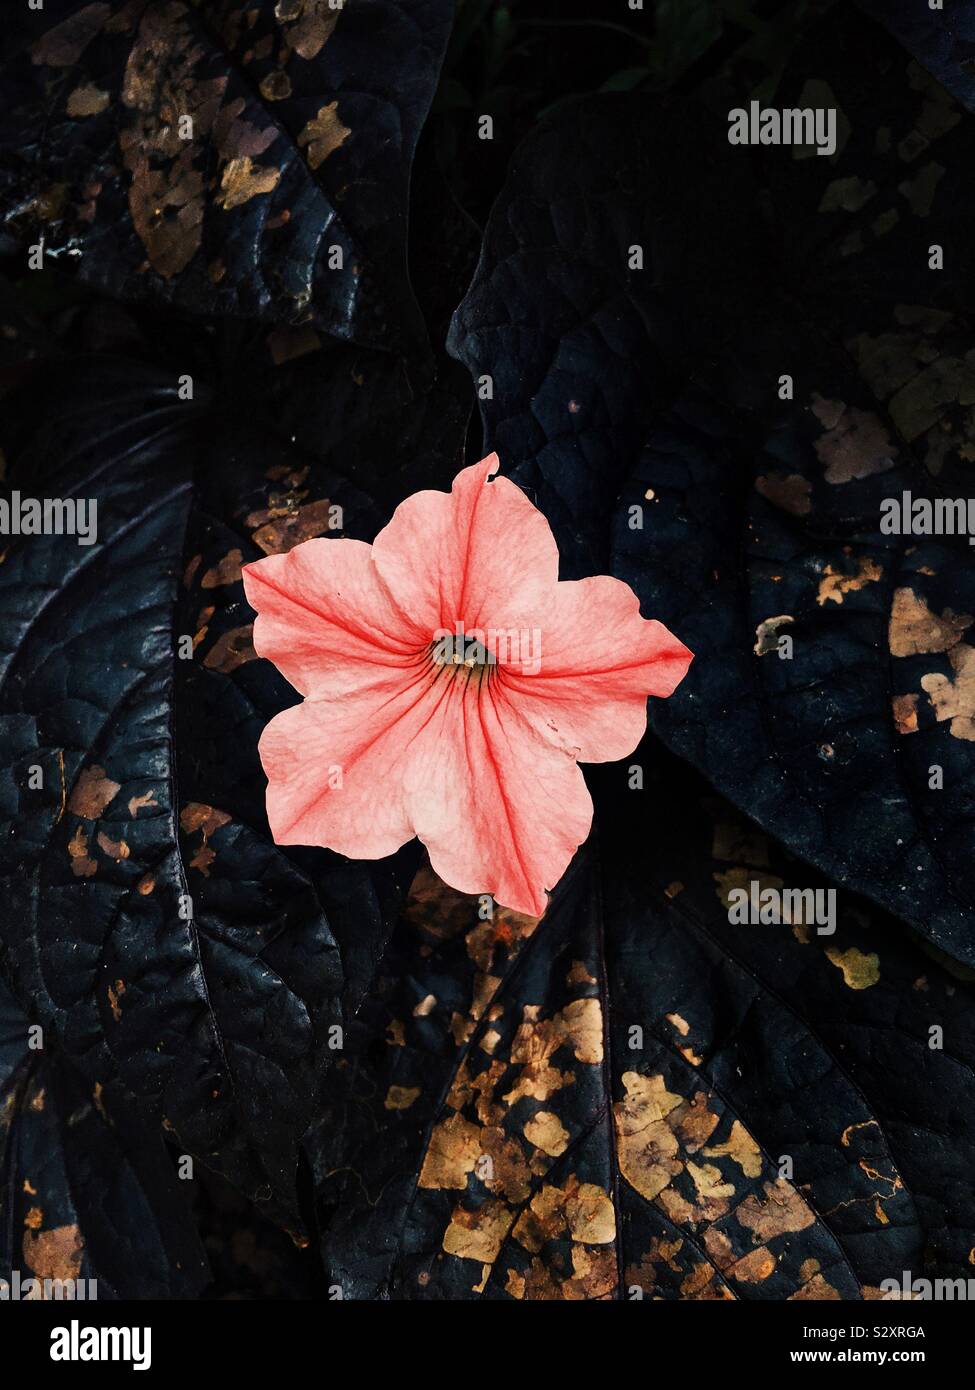 Pink flower among black and gold flecked leaves. Stock Photo